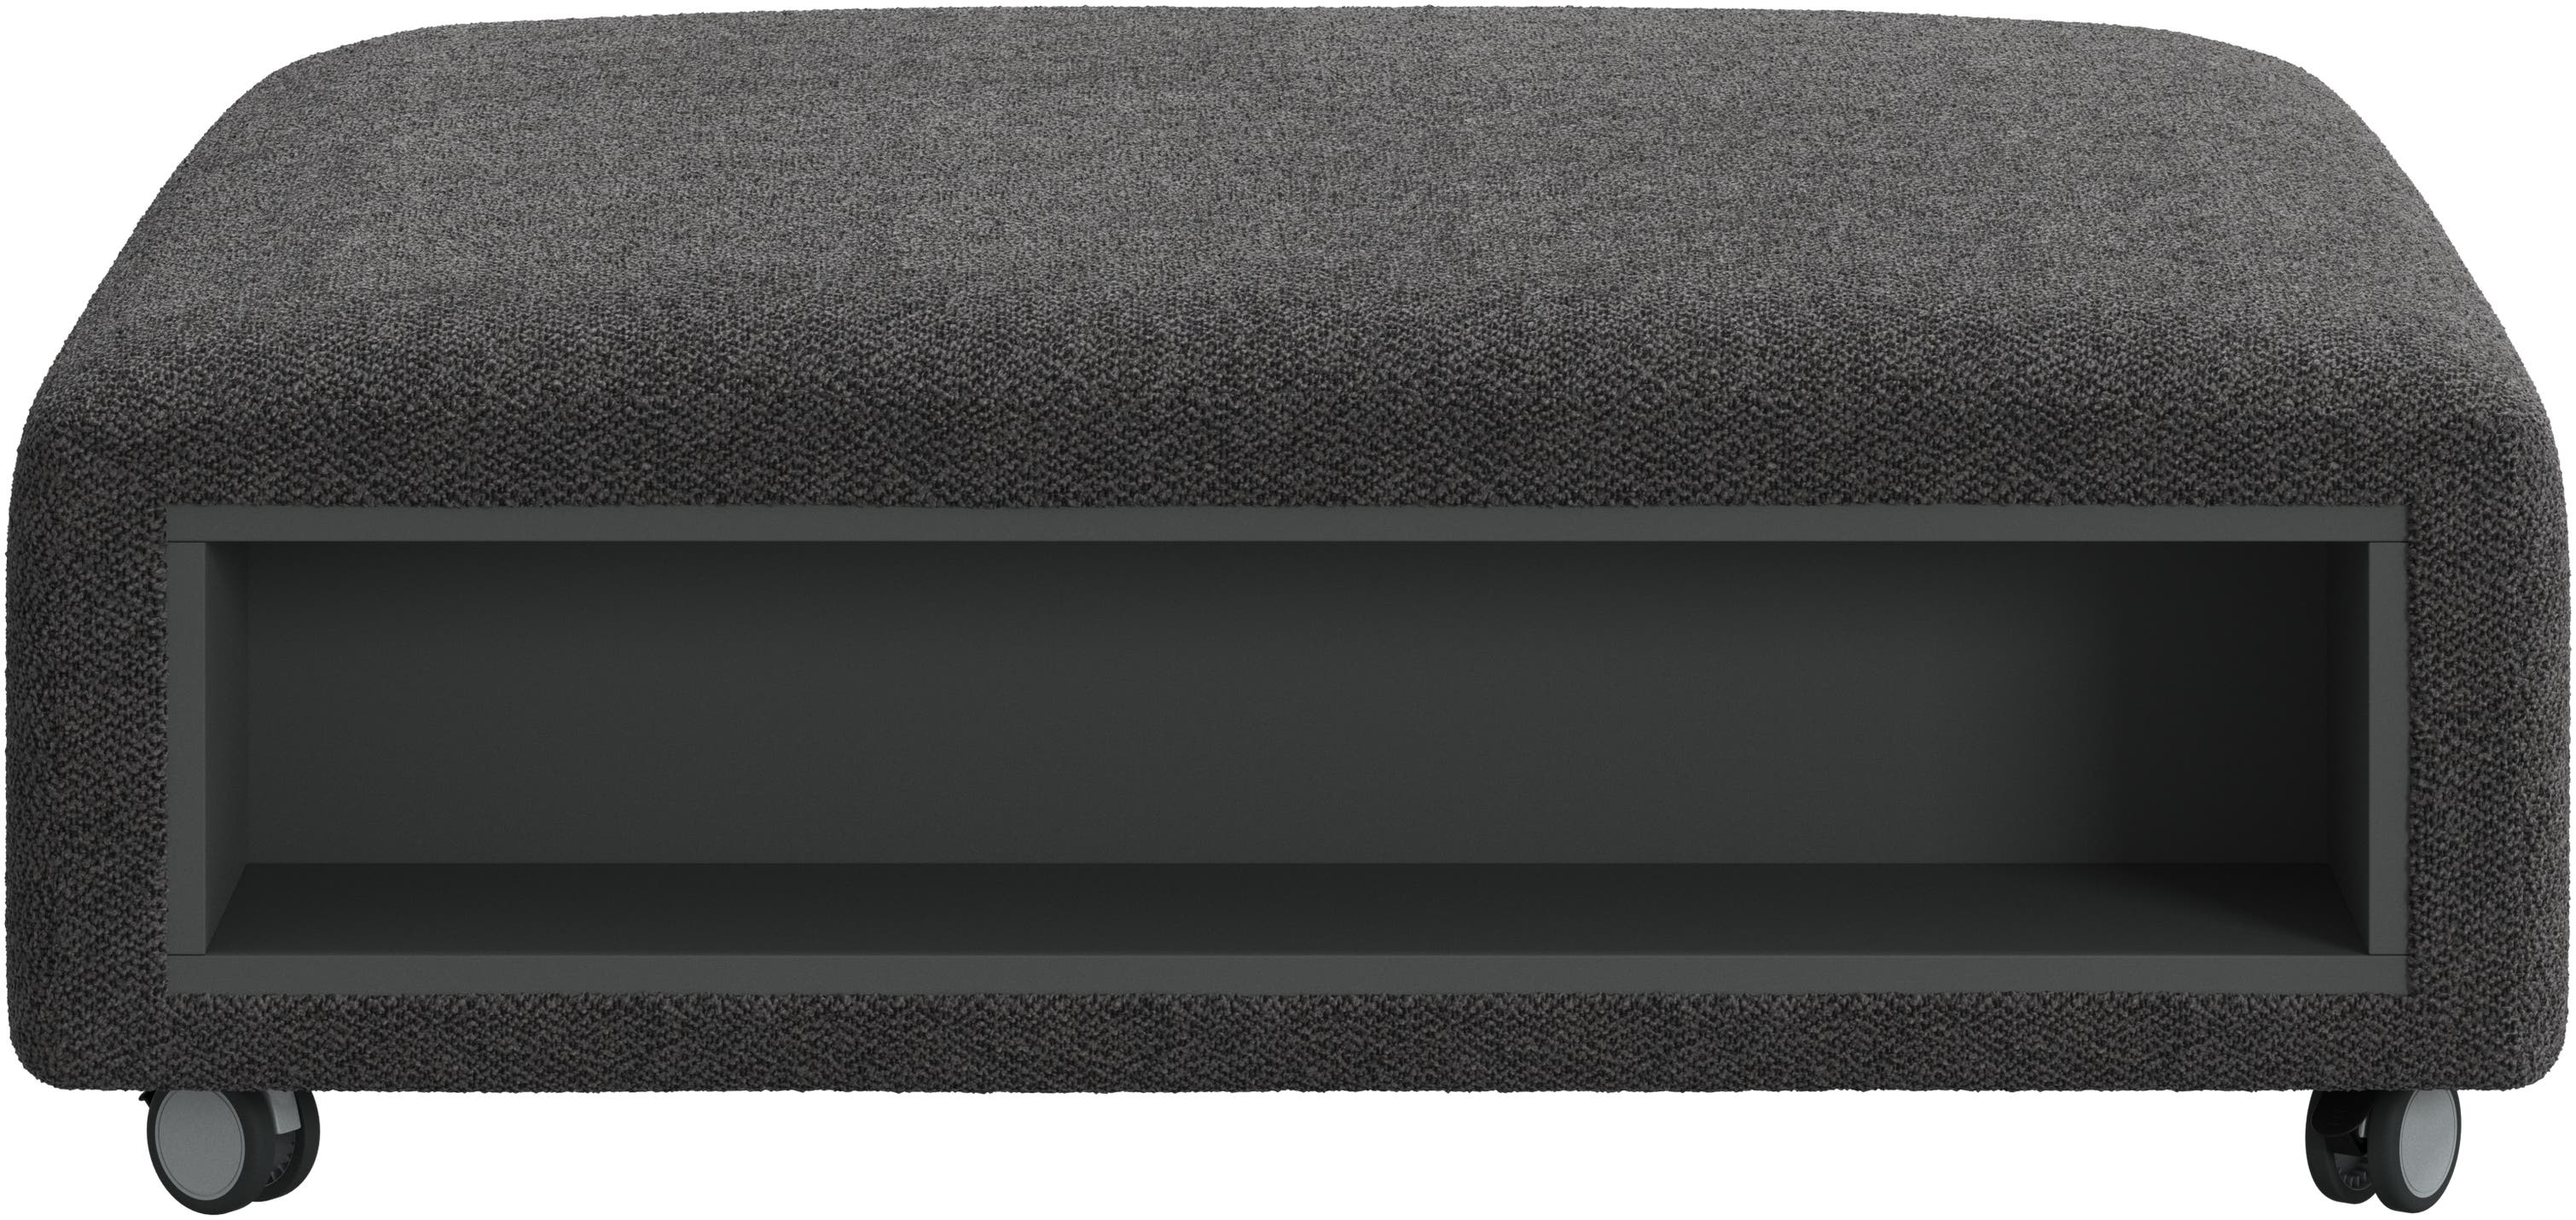 Hampton pouf on wheels with storage left and right sides